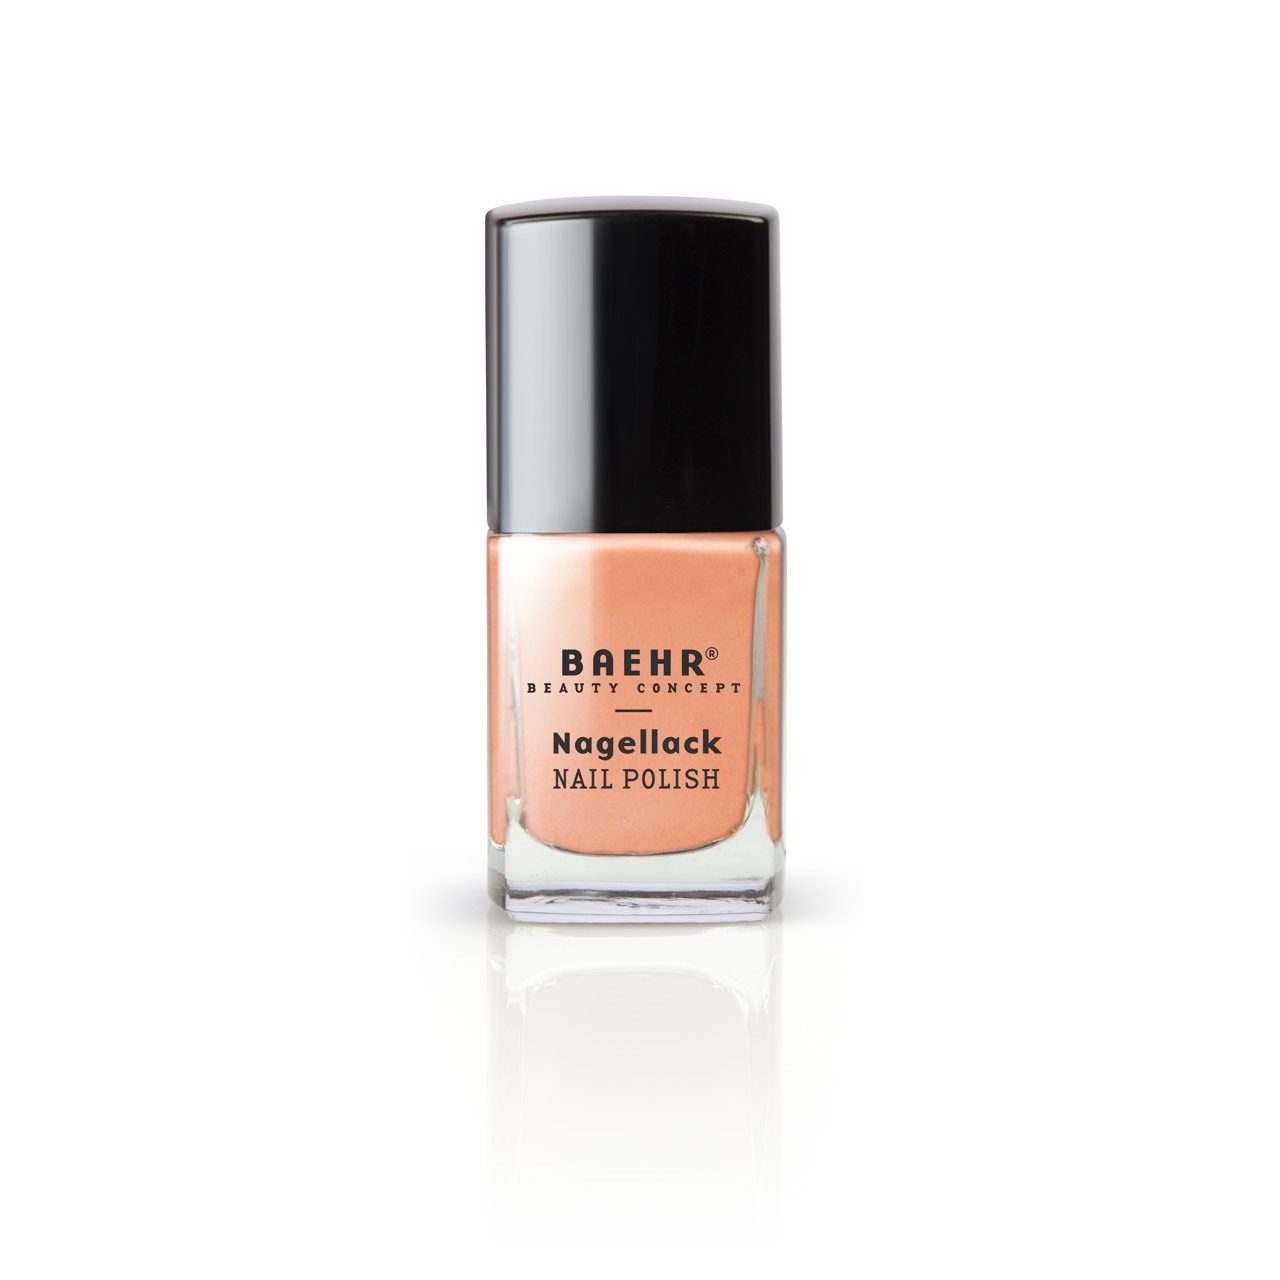 BAEHR BEAUTY CONCEPT - NAILS Nagellack pfirsich nude pearl 11 ml